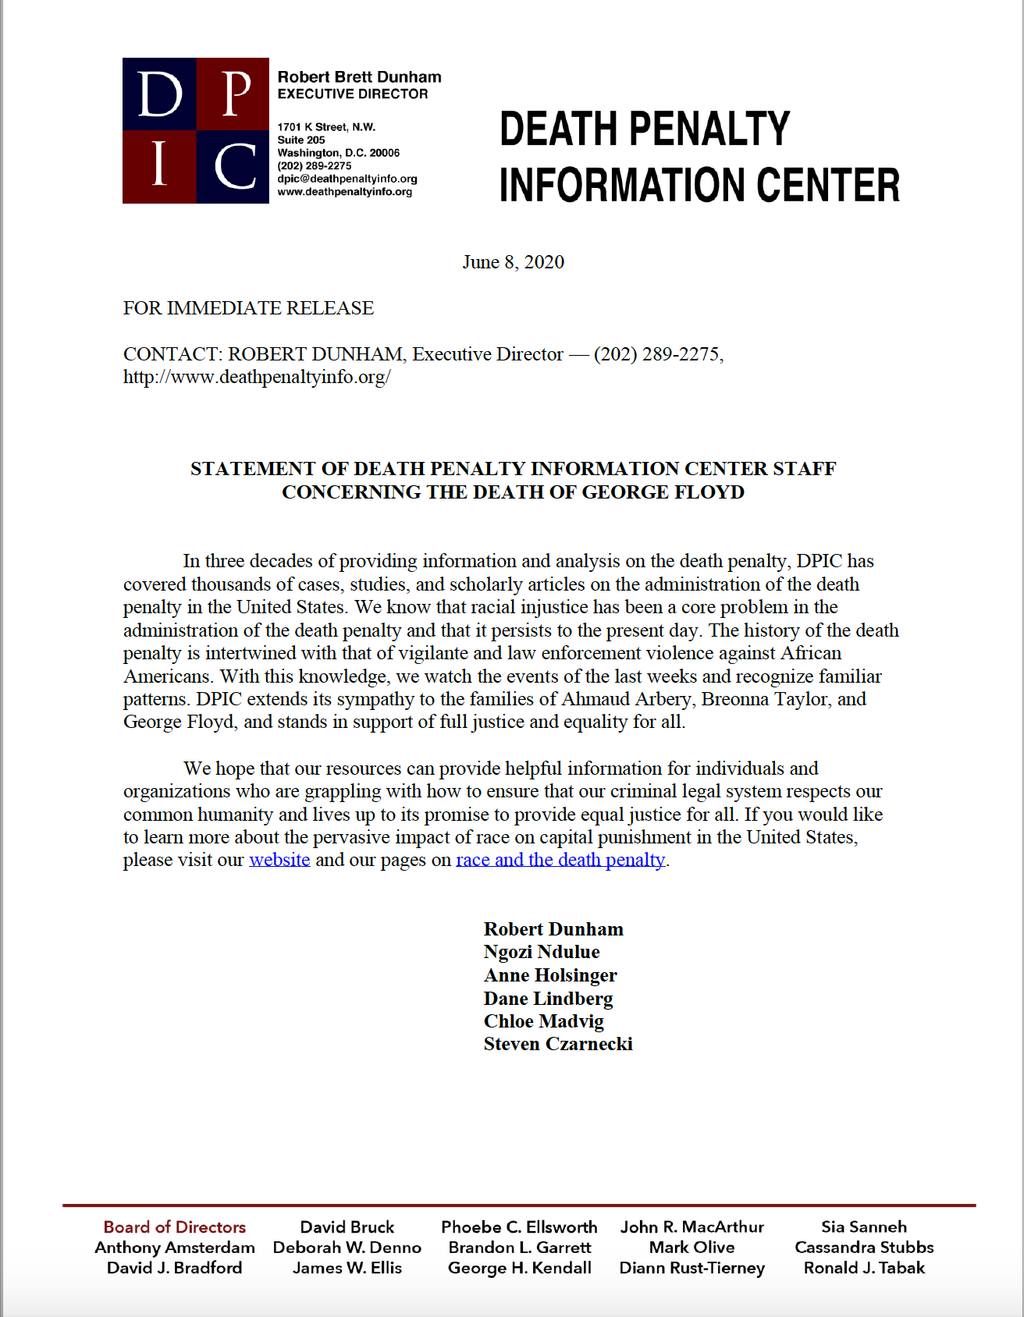 Death Penalty Information Center Statement Concerning the Death of George Floyd